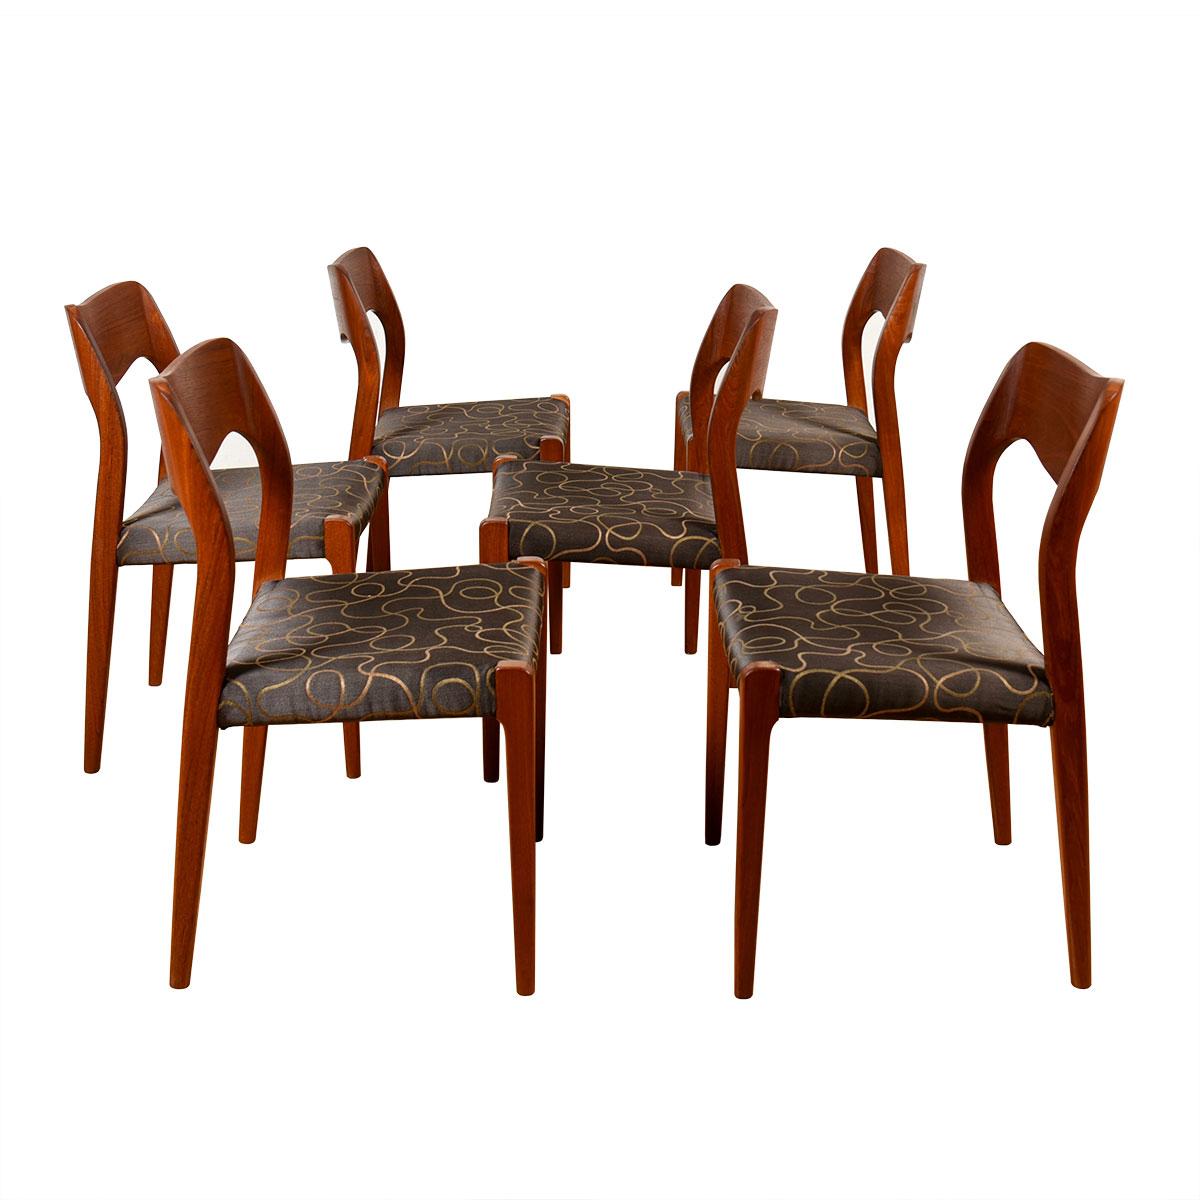 - Set of 6 Danish Modern dining chairs, designed by Niels Møller, Model No. 71
- One of the most beautiful designs by Moller
- This seats have been re-upholstered